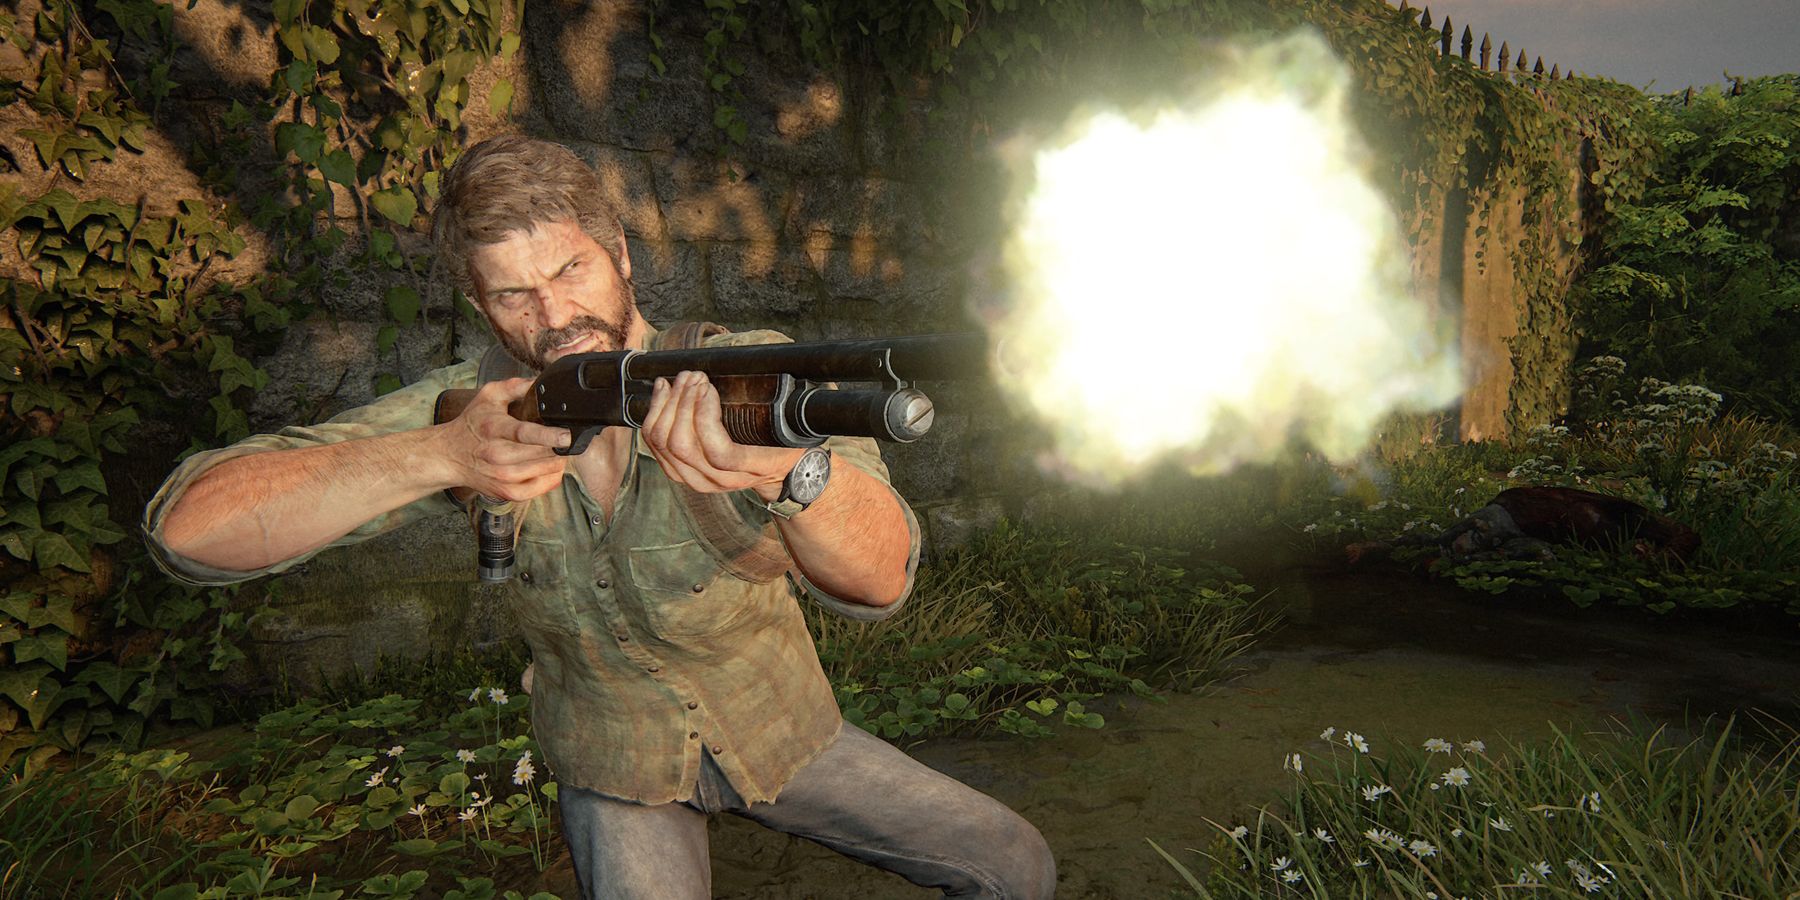 Scary The Last of Us Enemy Concept Would Give Elden Ring’s Runebear Competition